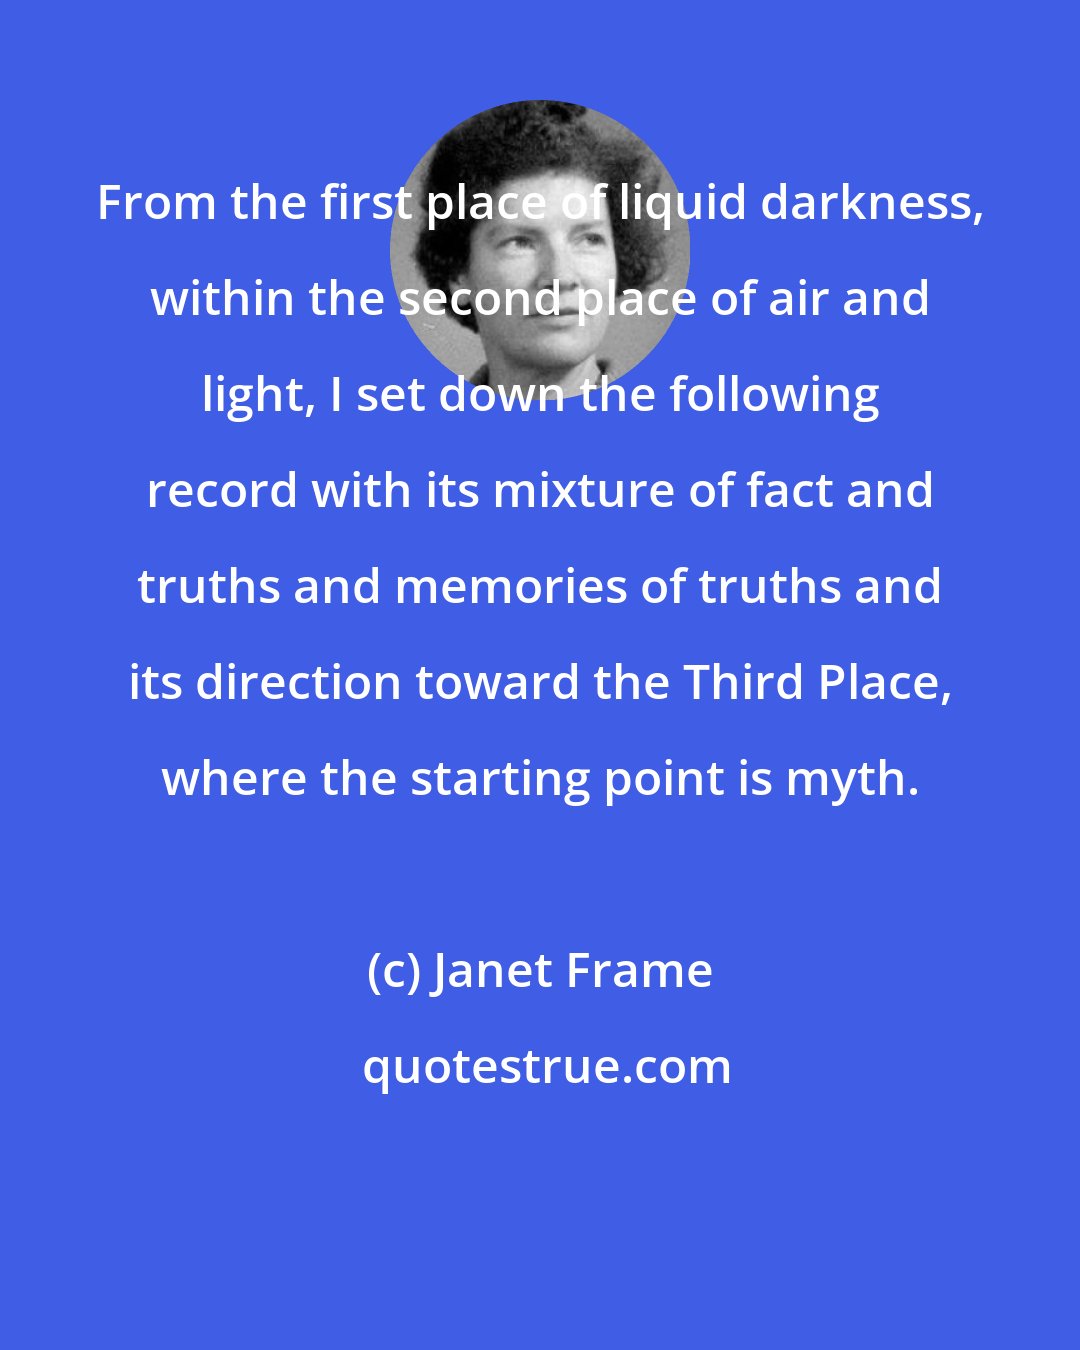 Janet Frame: From the first place of liquid darkness, within the second place of air and light, I set down the following record with its mixture of fact and truths and memories of truths and its direction toward the Third Place, where the starting point is myth.